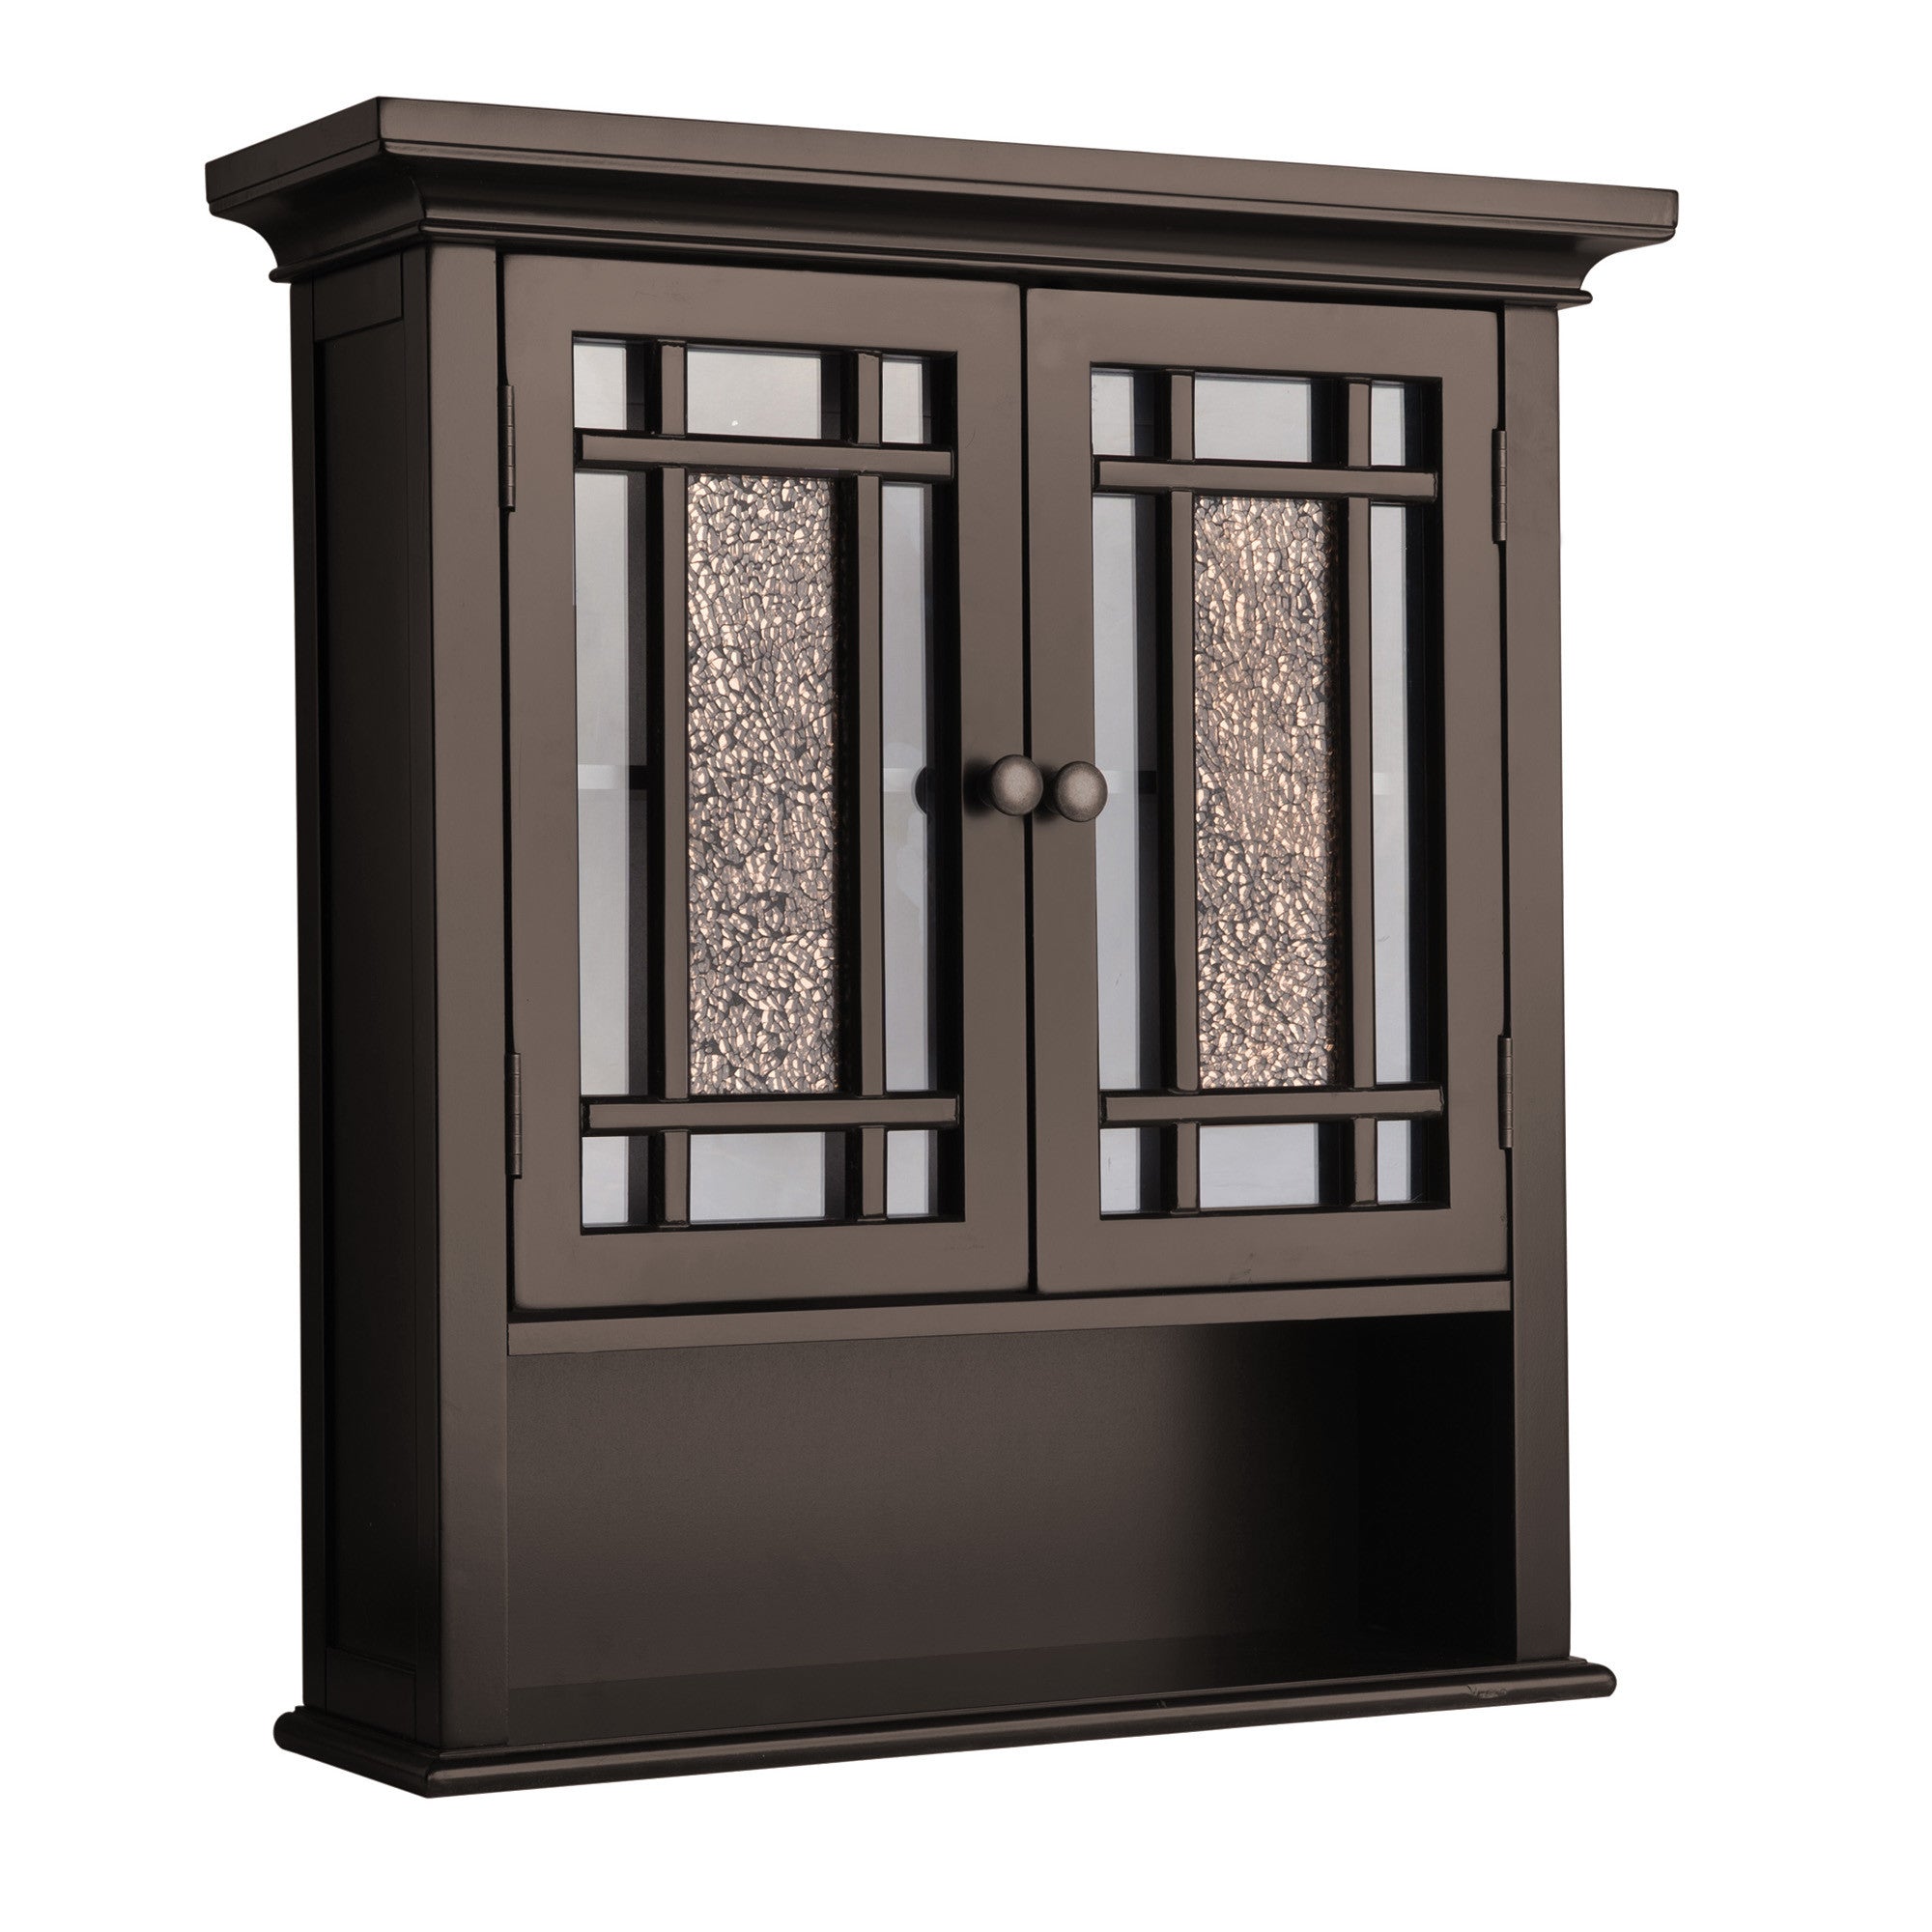 Elegant Home Fashions Windsor Removable Wooden Wall Cabinet with Glass Mosaic Doors- Dark Espresso